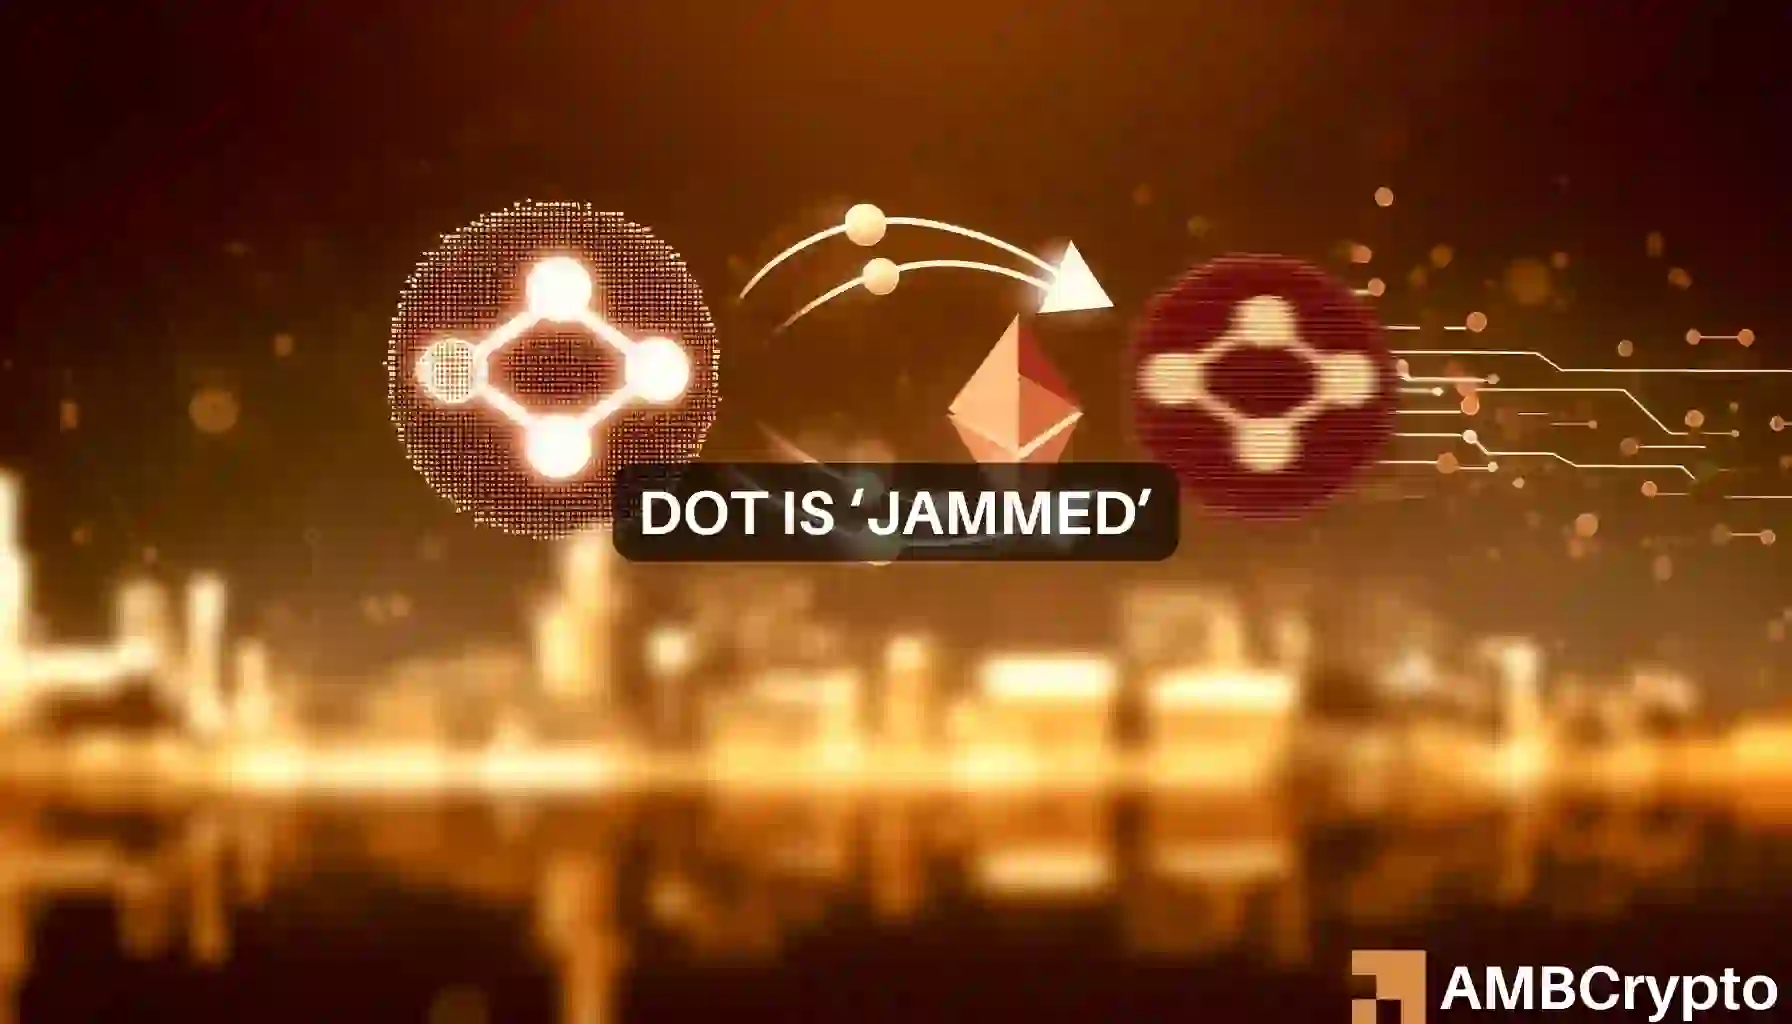 Polkadot gets new JAM – What does this mean for DOT’s price?